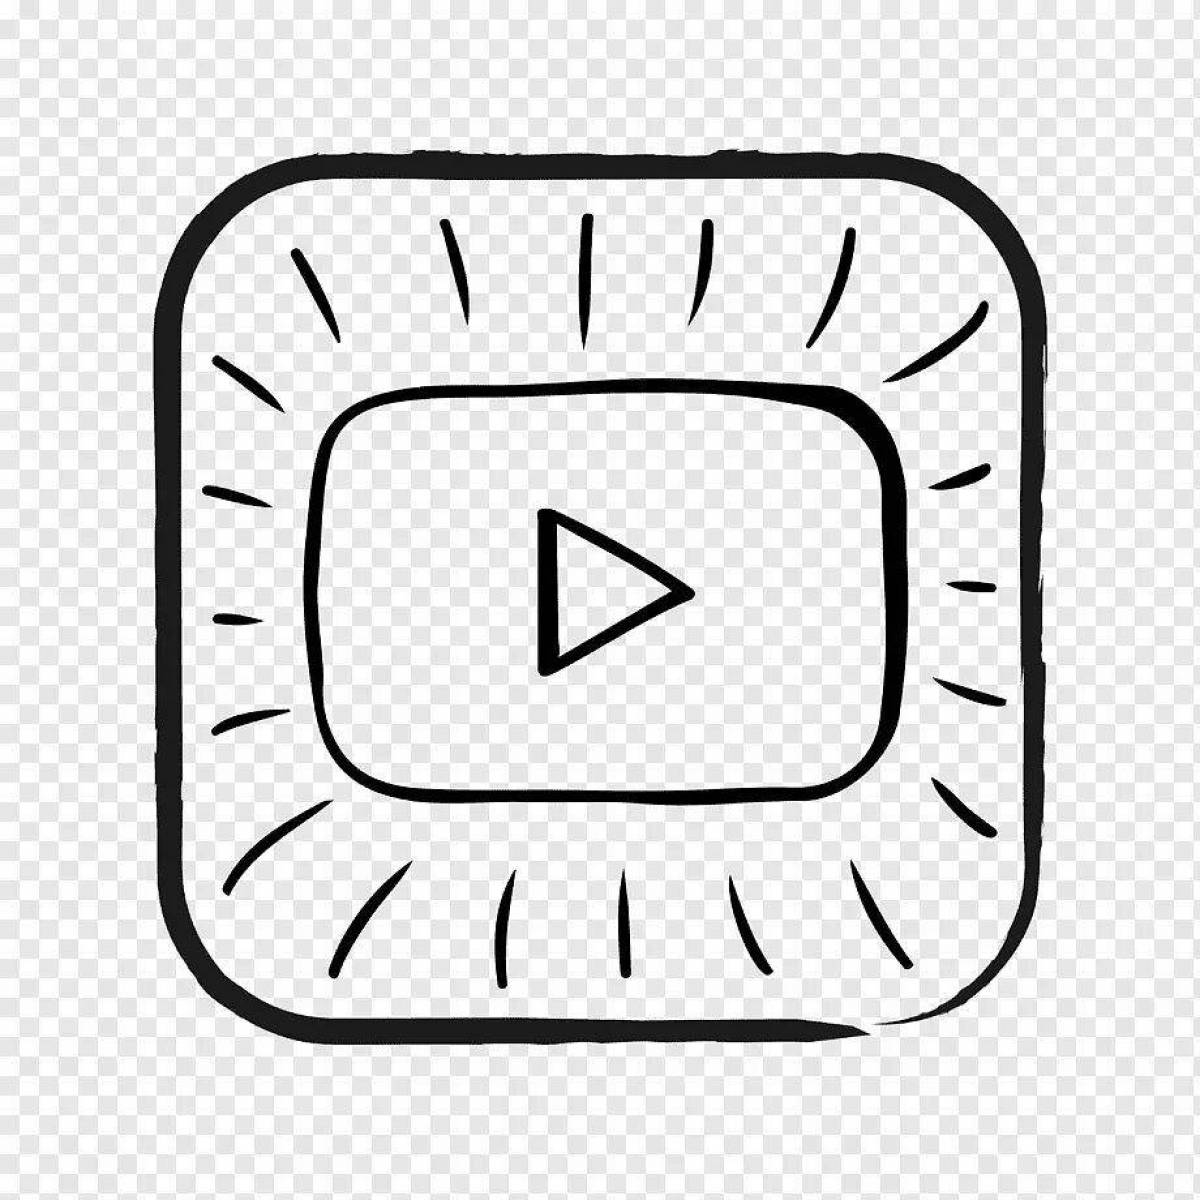 Youtube fat button coloring page